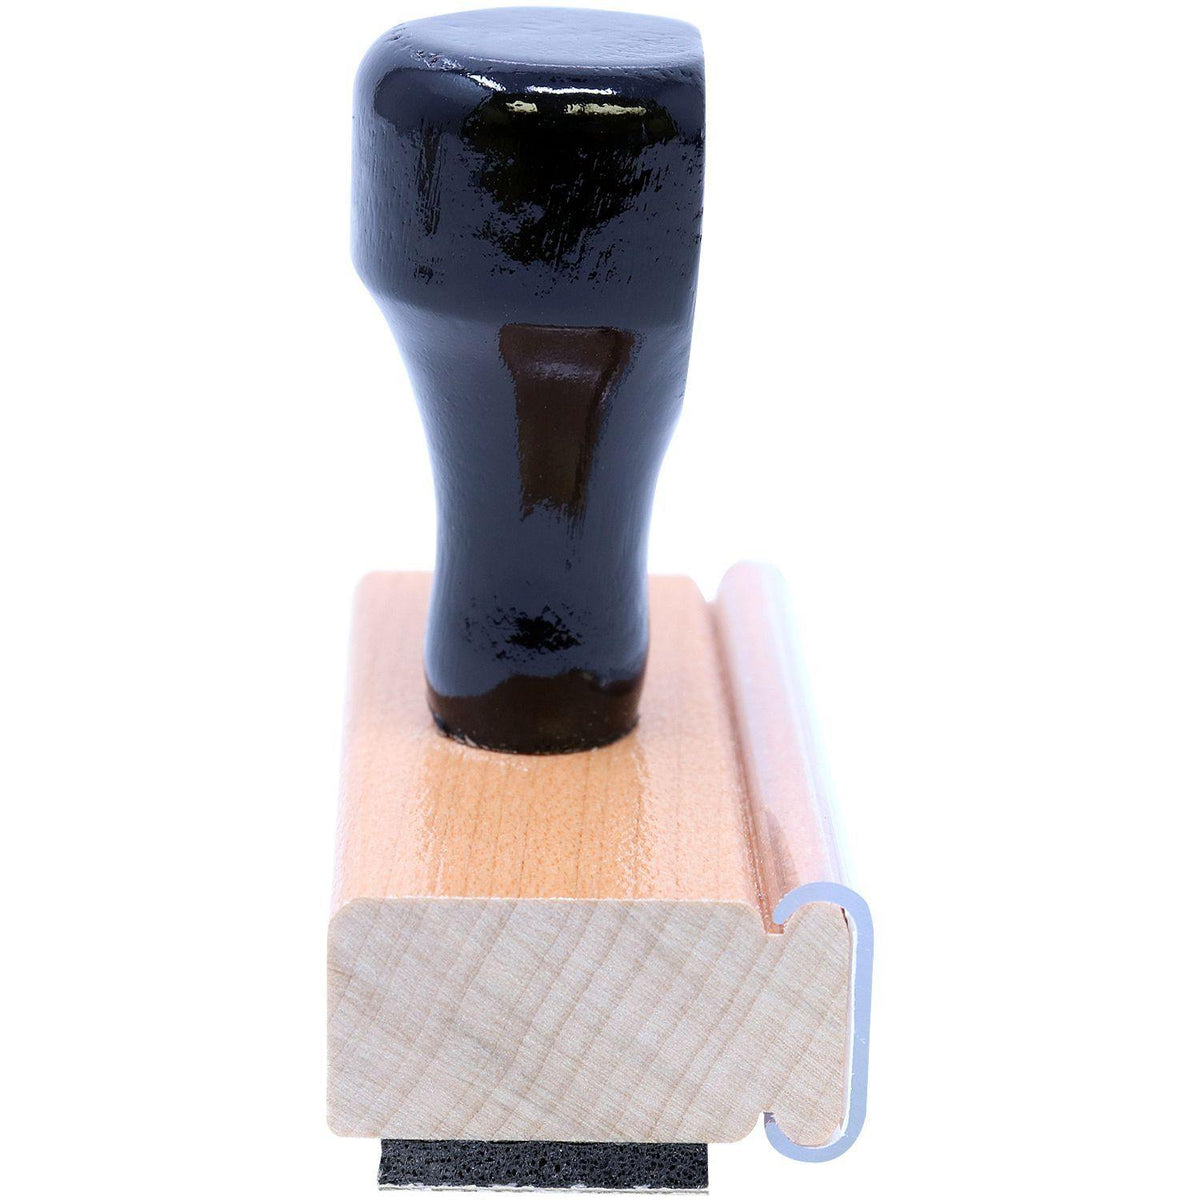 Postage Due Rubber Stamp - Engineer Seal Stamps - Brand_Acorn, Impression Size_Small, Stamp Type_Regular Stamp, Type of Use_General, Type of Use_Office, Type of Use_Postal